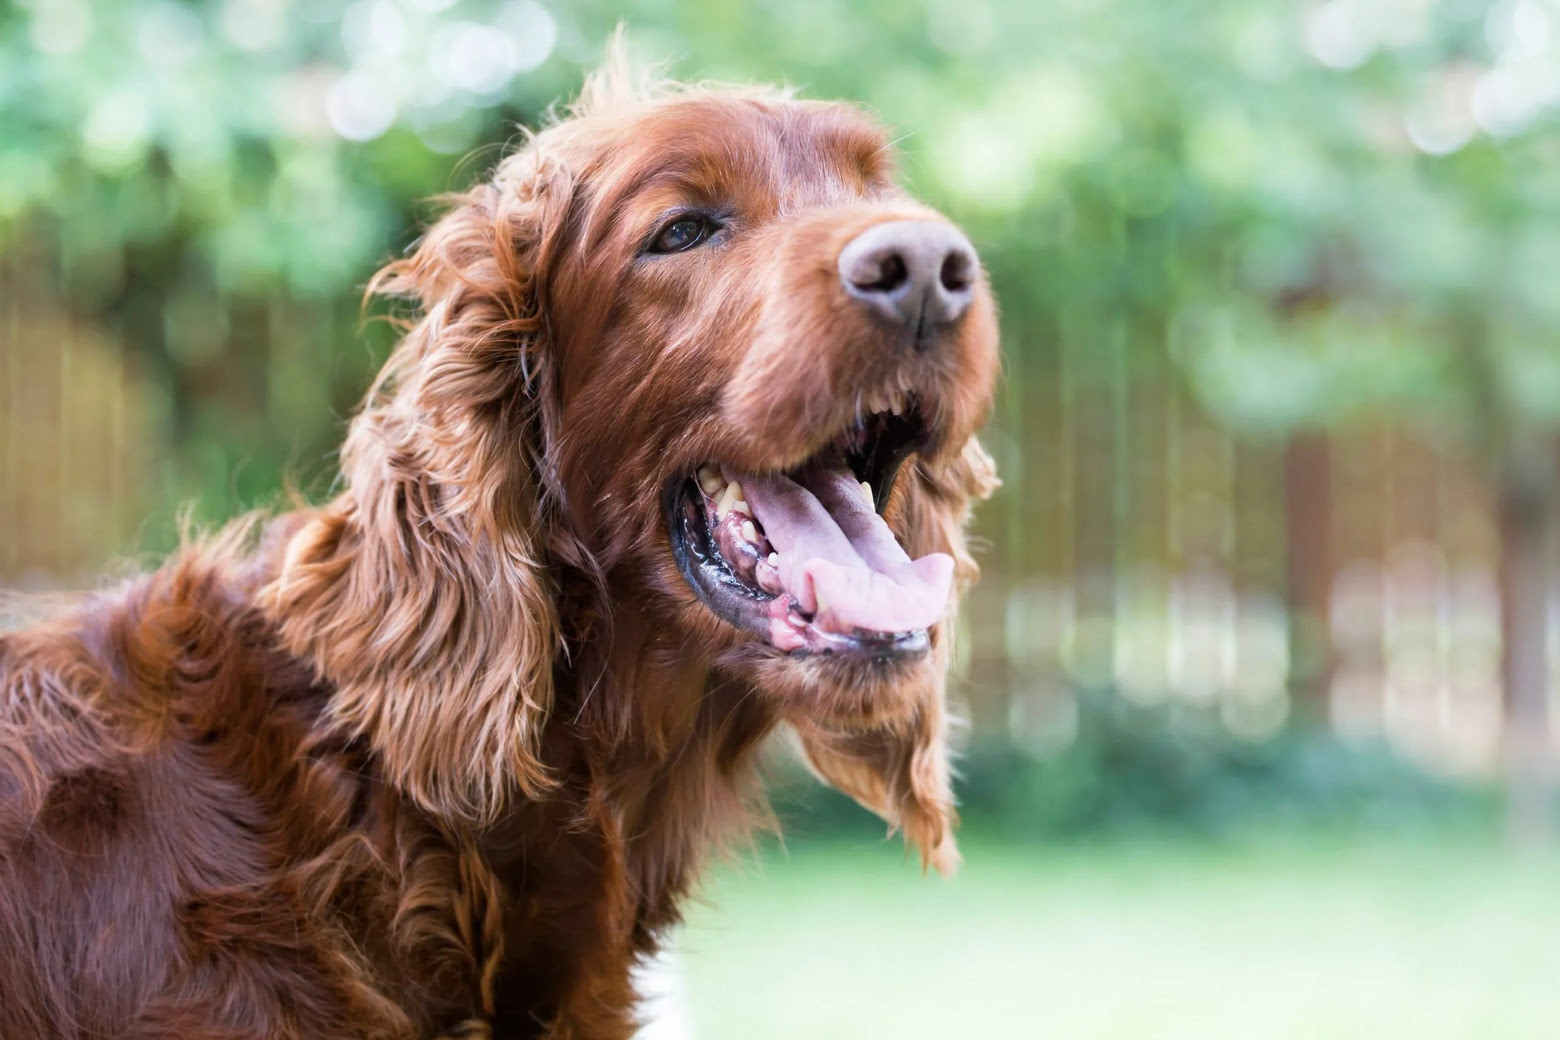 What Does A Heartworm Cough Sound Like In A Dog?